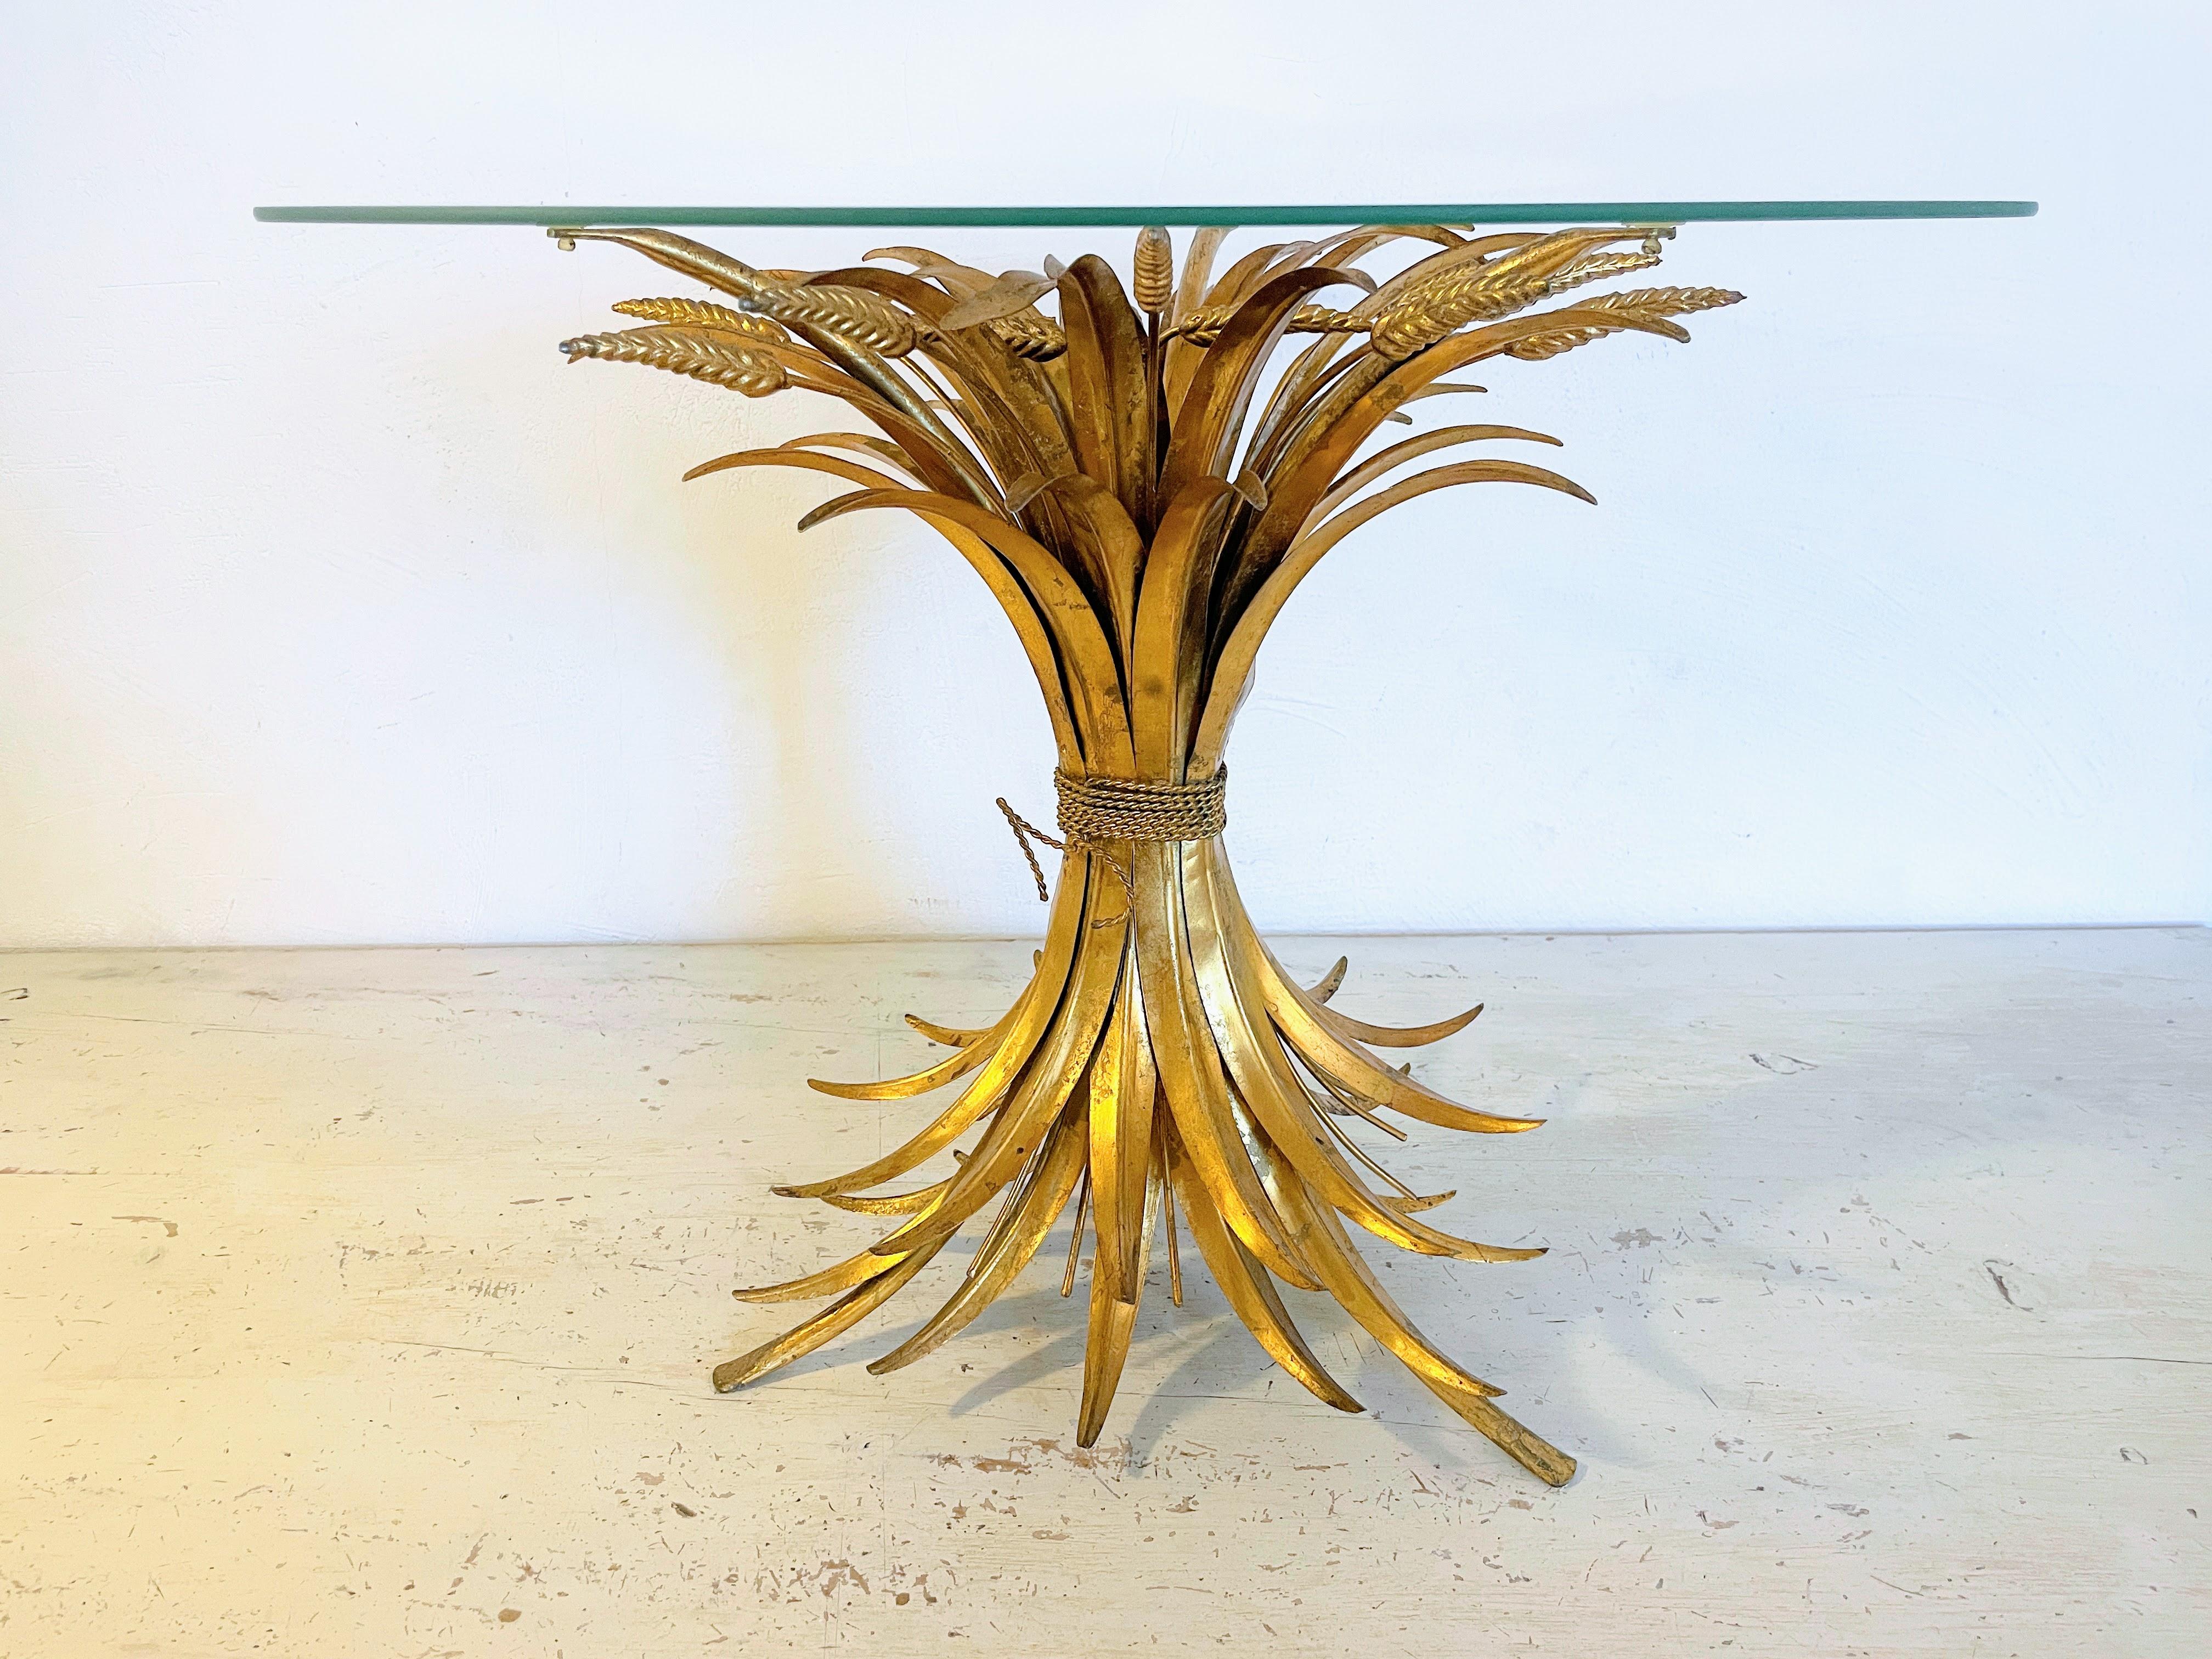 ntroducing a captivating Hollywood Regency 'Ears of Wheat' Coffee Table, originating from the glamorous era of the 1950s. This exquisite table boasts a gold-colored, intricately adorned base, skillfully crafted in the form of a sheaf of wheat, an